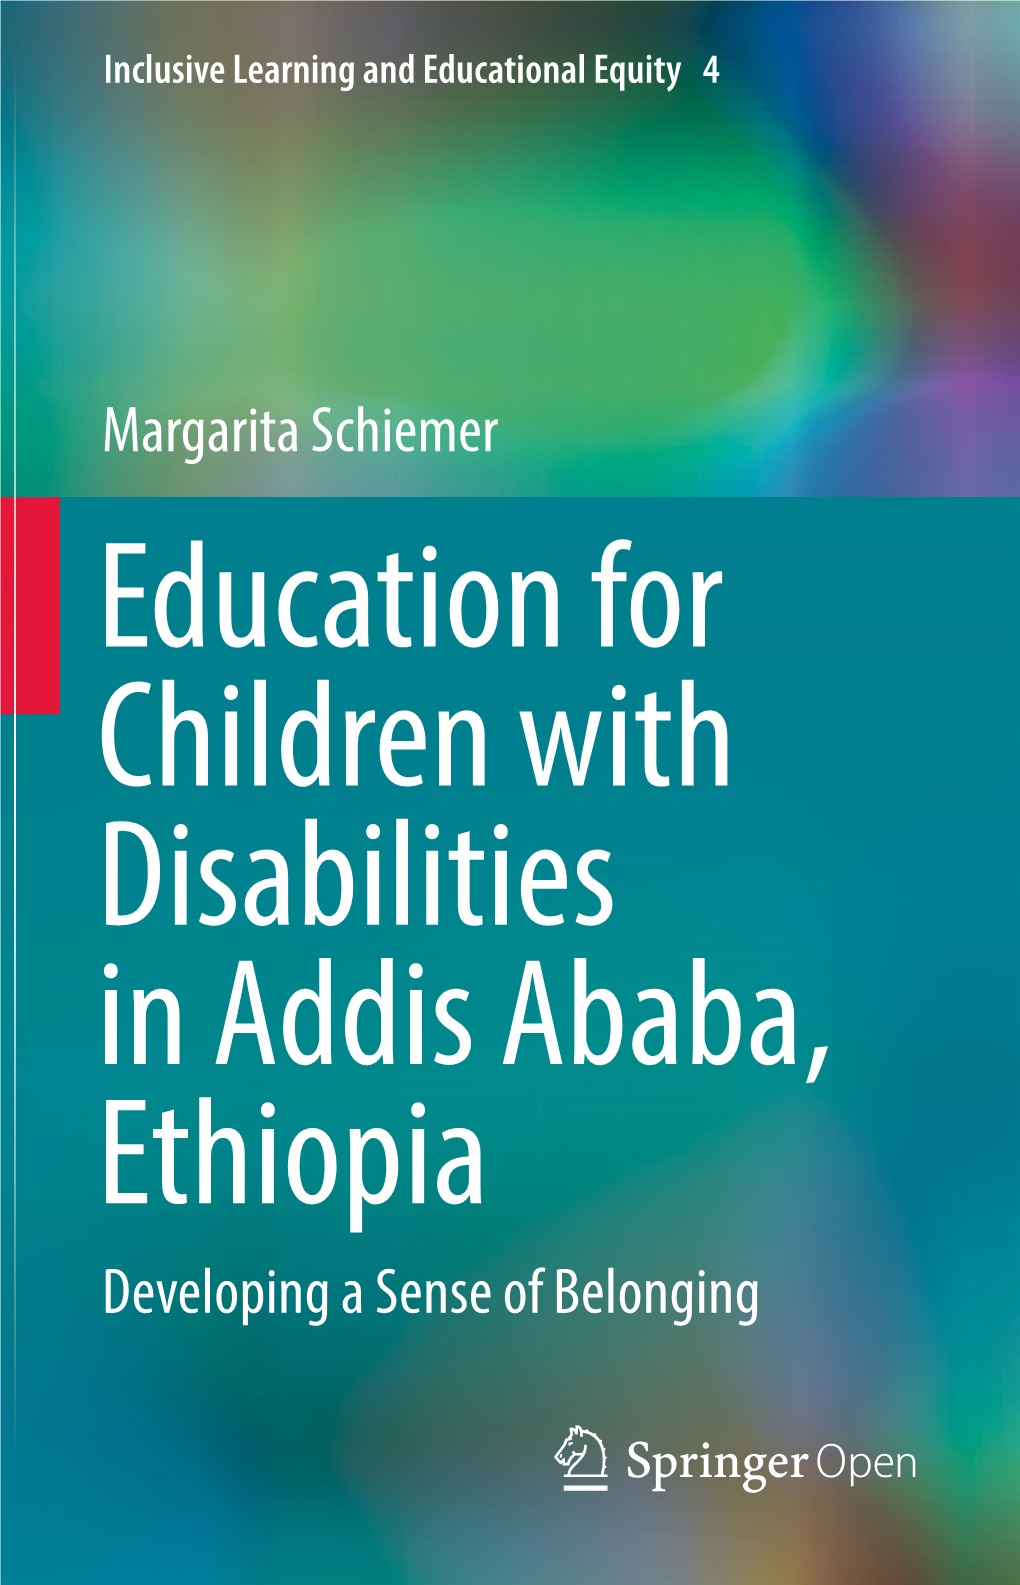 Education for Children with Disabilities in Addis Ababa, Ethiopia Developing a Sense of Belonging Inclusive Learning and Educational Equity